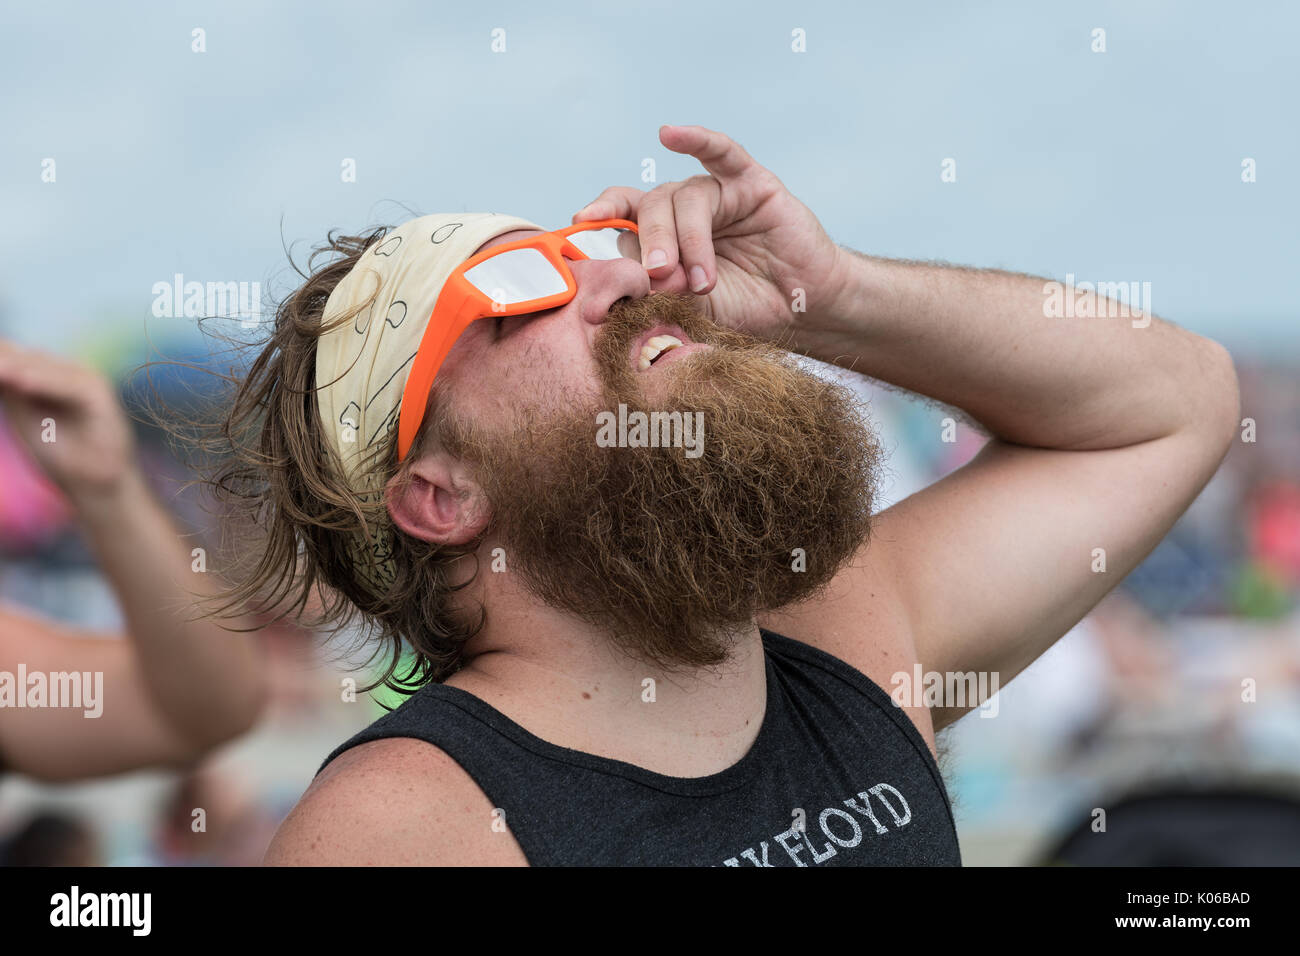 Charleston, Isle of Palms, USA. 21st Aug, 2017. A beach goer looks up at the total solar eclipse over the beach outside Charleston August 21, 2017 in Isle of Palms, South Carolina. The solar eclipse after sweeping across the nation crosses the Charleston area before heading over the Atlantic Ocean. Credit: Planetpix/Alamy Live News Stock Photo